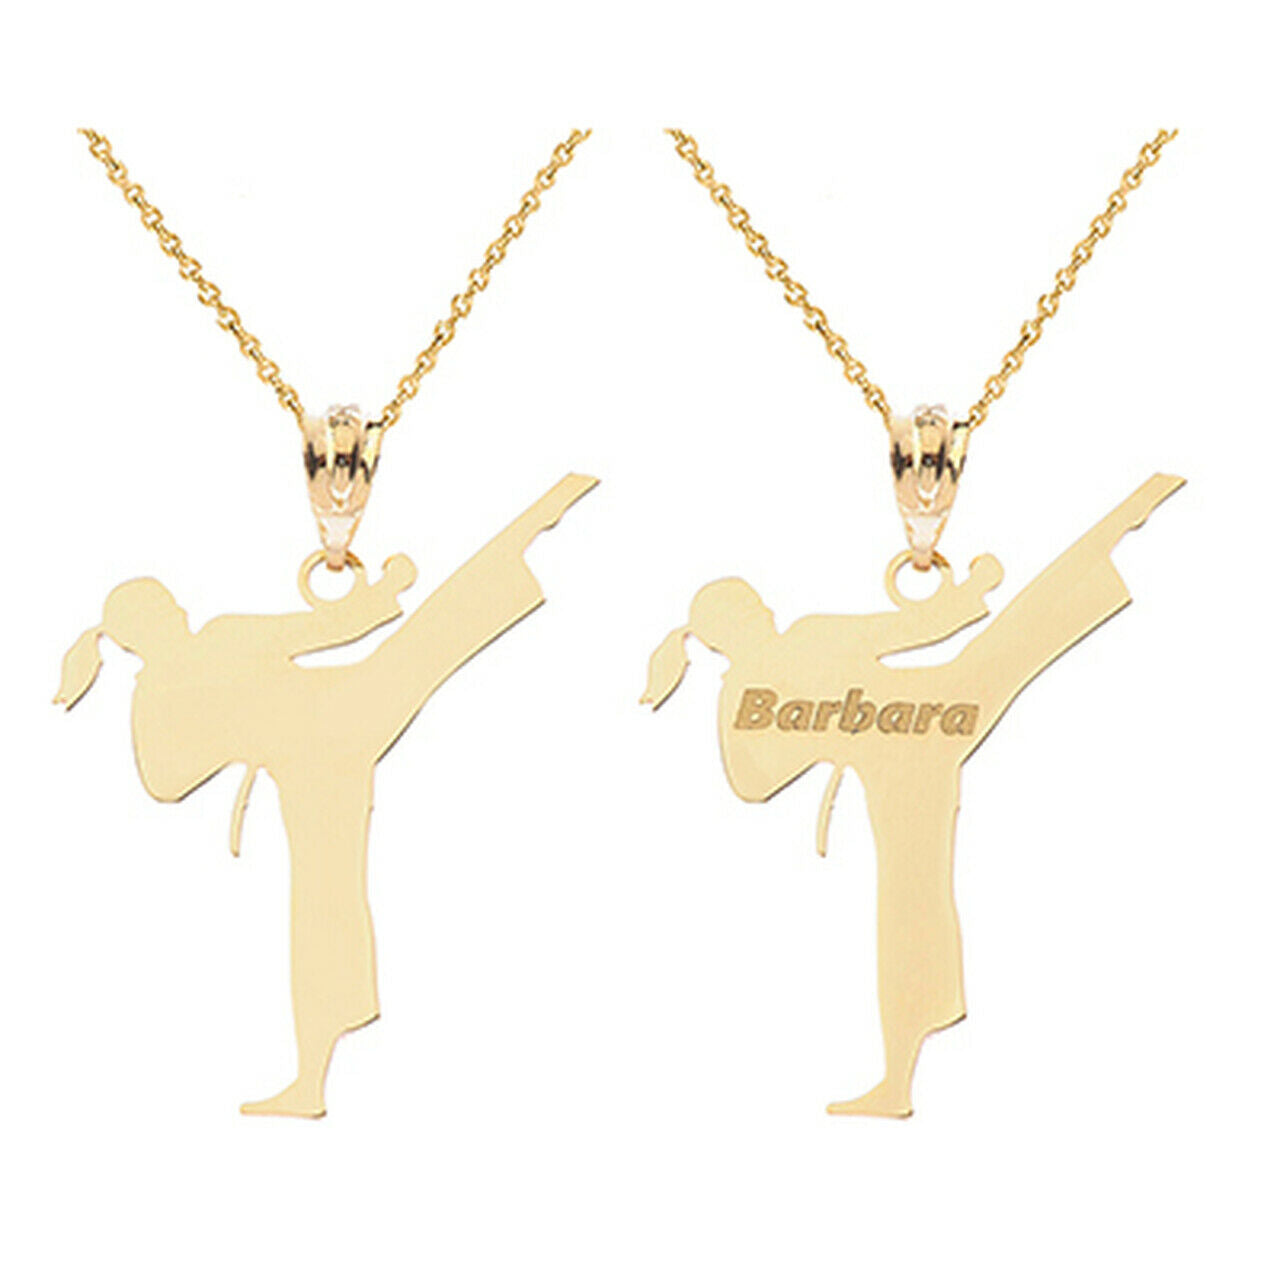 Personalized Name 10k 14k Gold Girl Female Karate Martial Arts Pendant Necklace